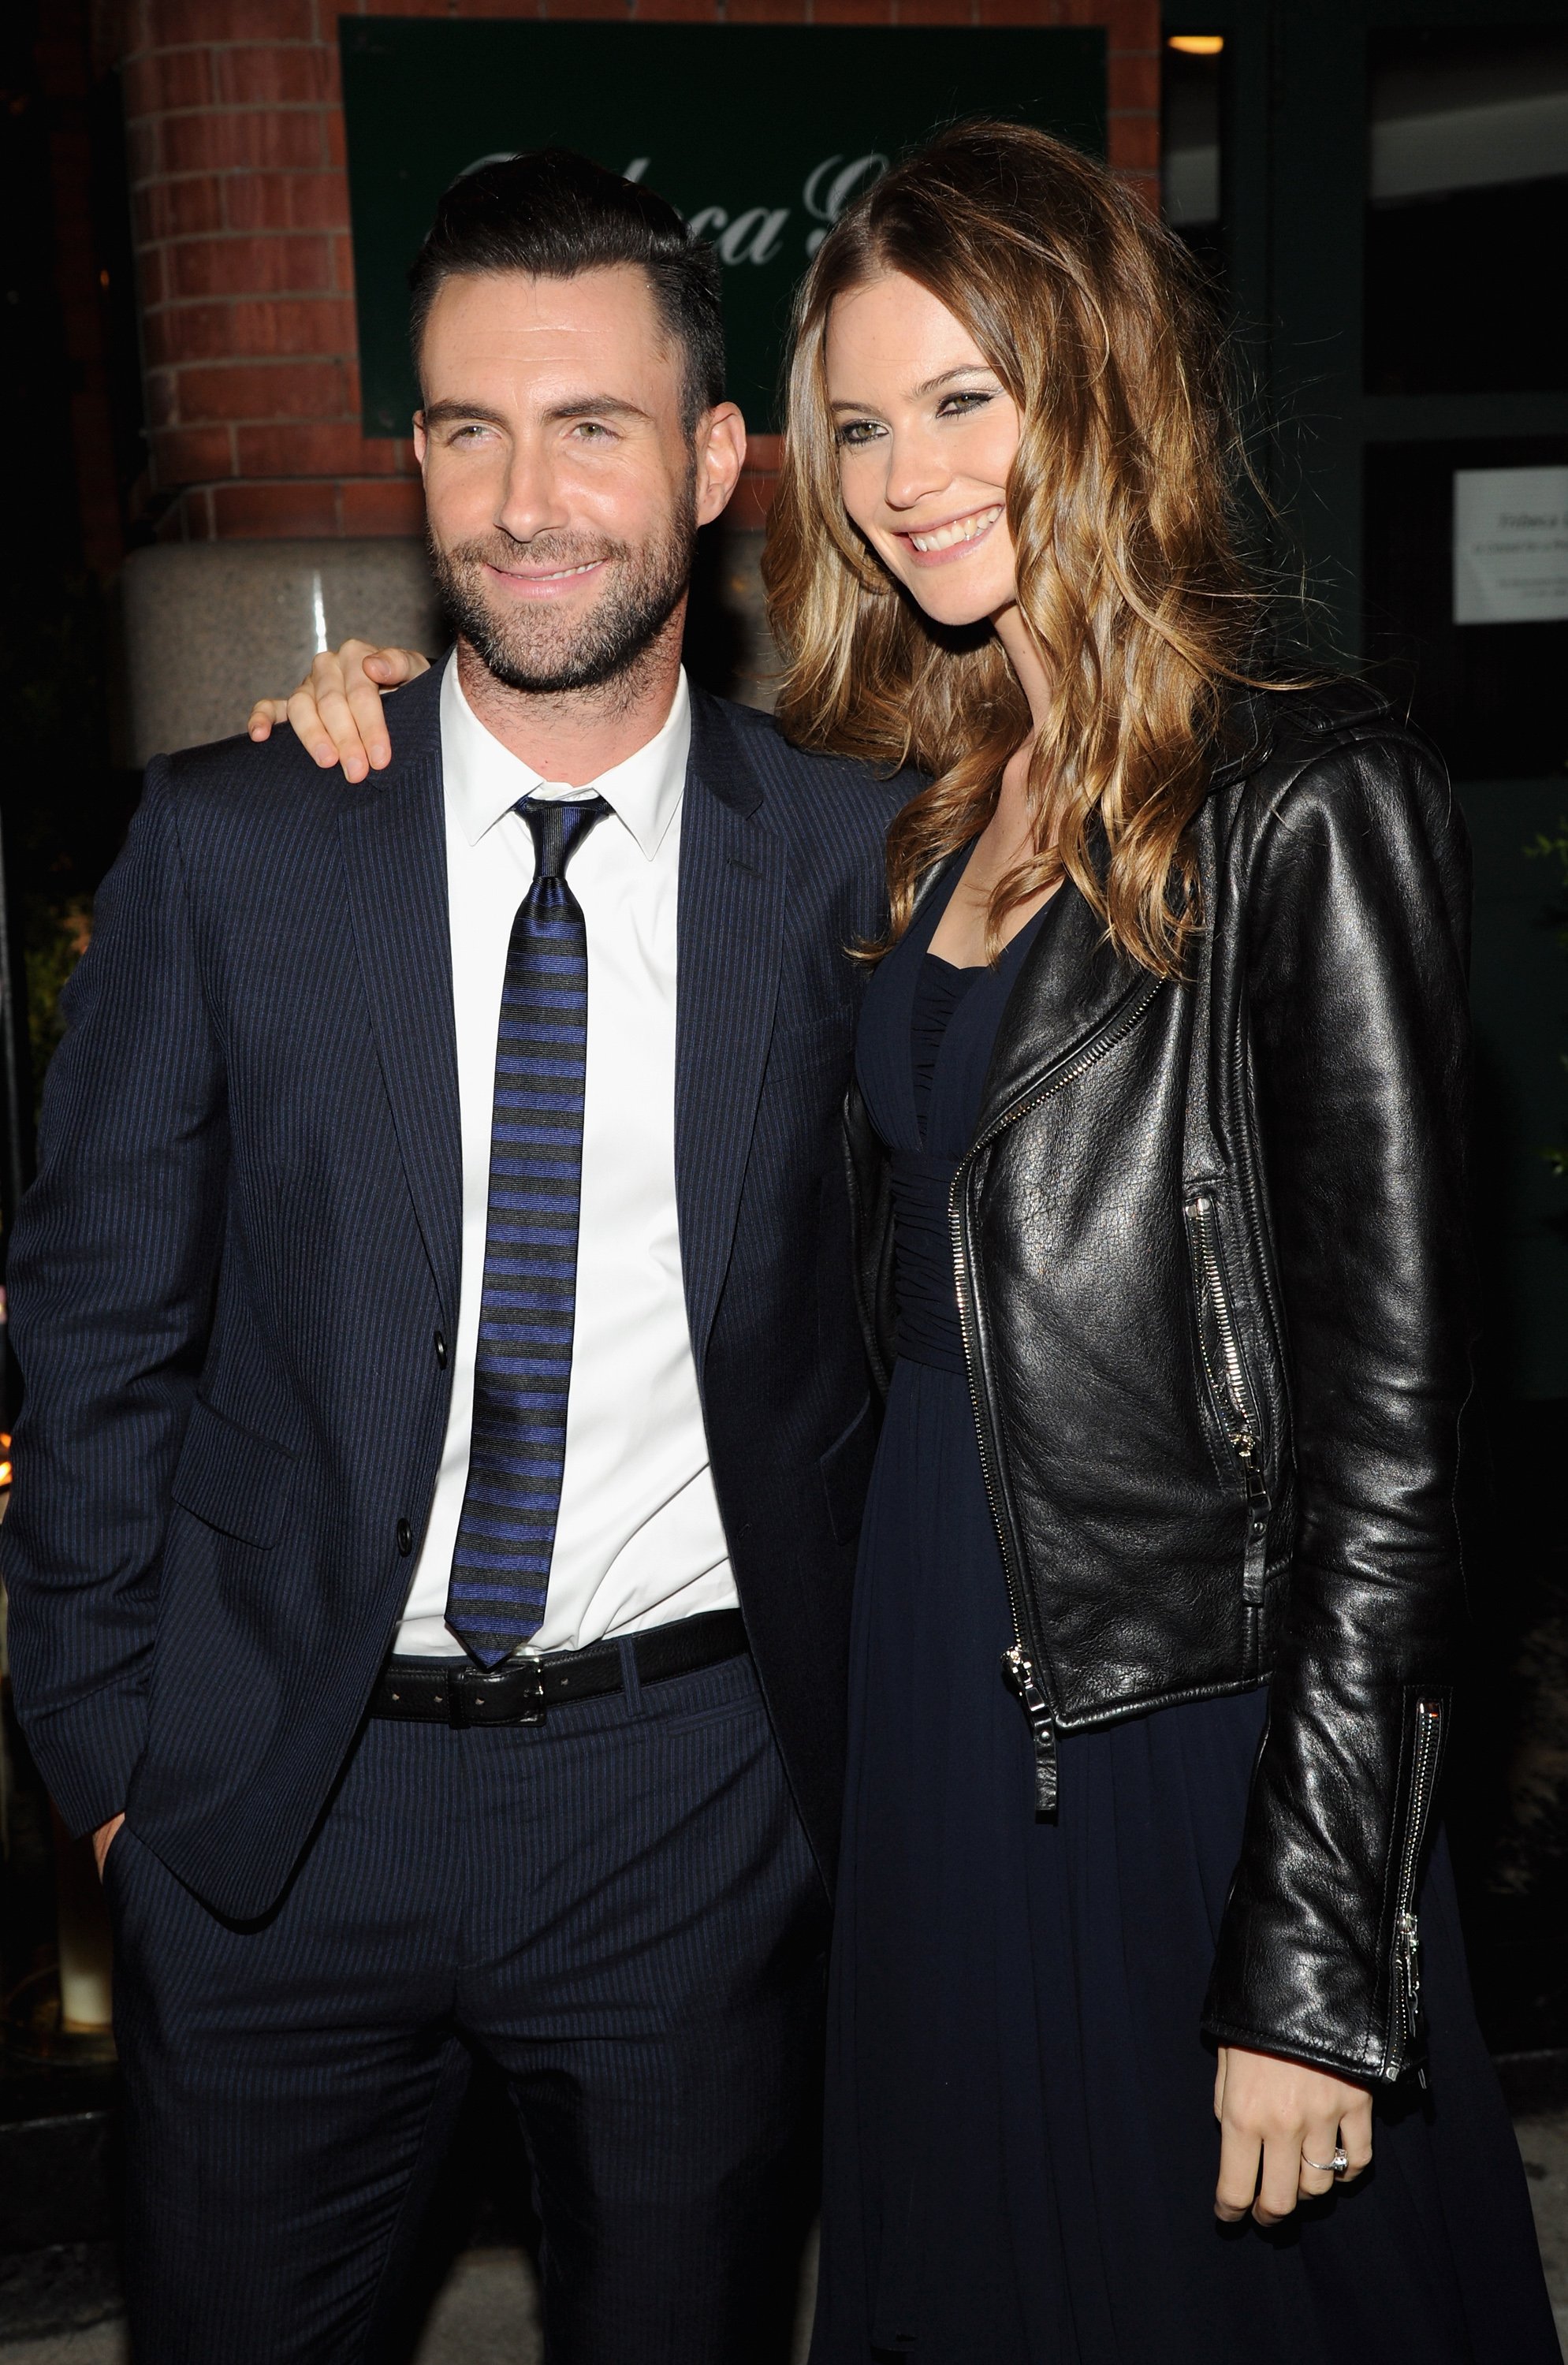 Adam Levine and Behati Prinsloo at the CHANEL Dinner in honor of the 2014 Tribeca Film Festival closing night film 'Begin Again' at Tribeca Grill on April 26, 2014 in New York City | Photo: Getty Images